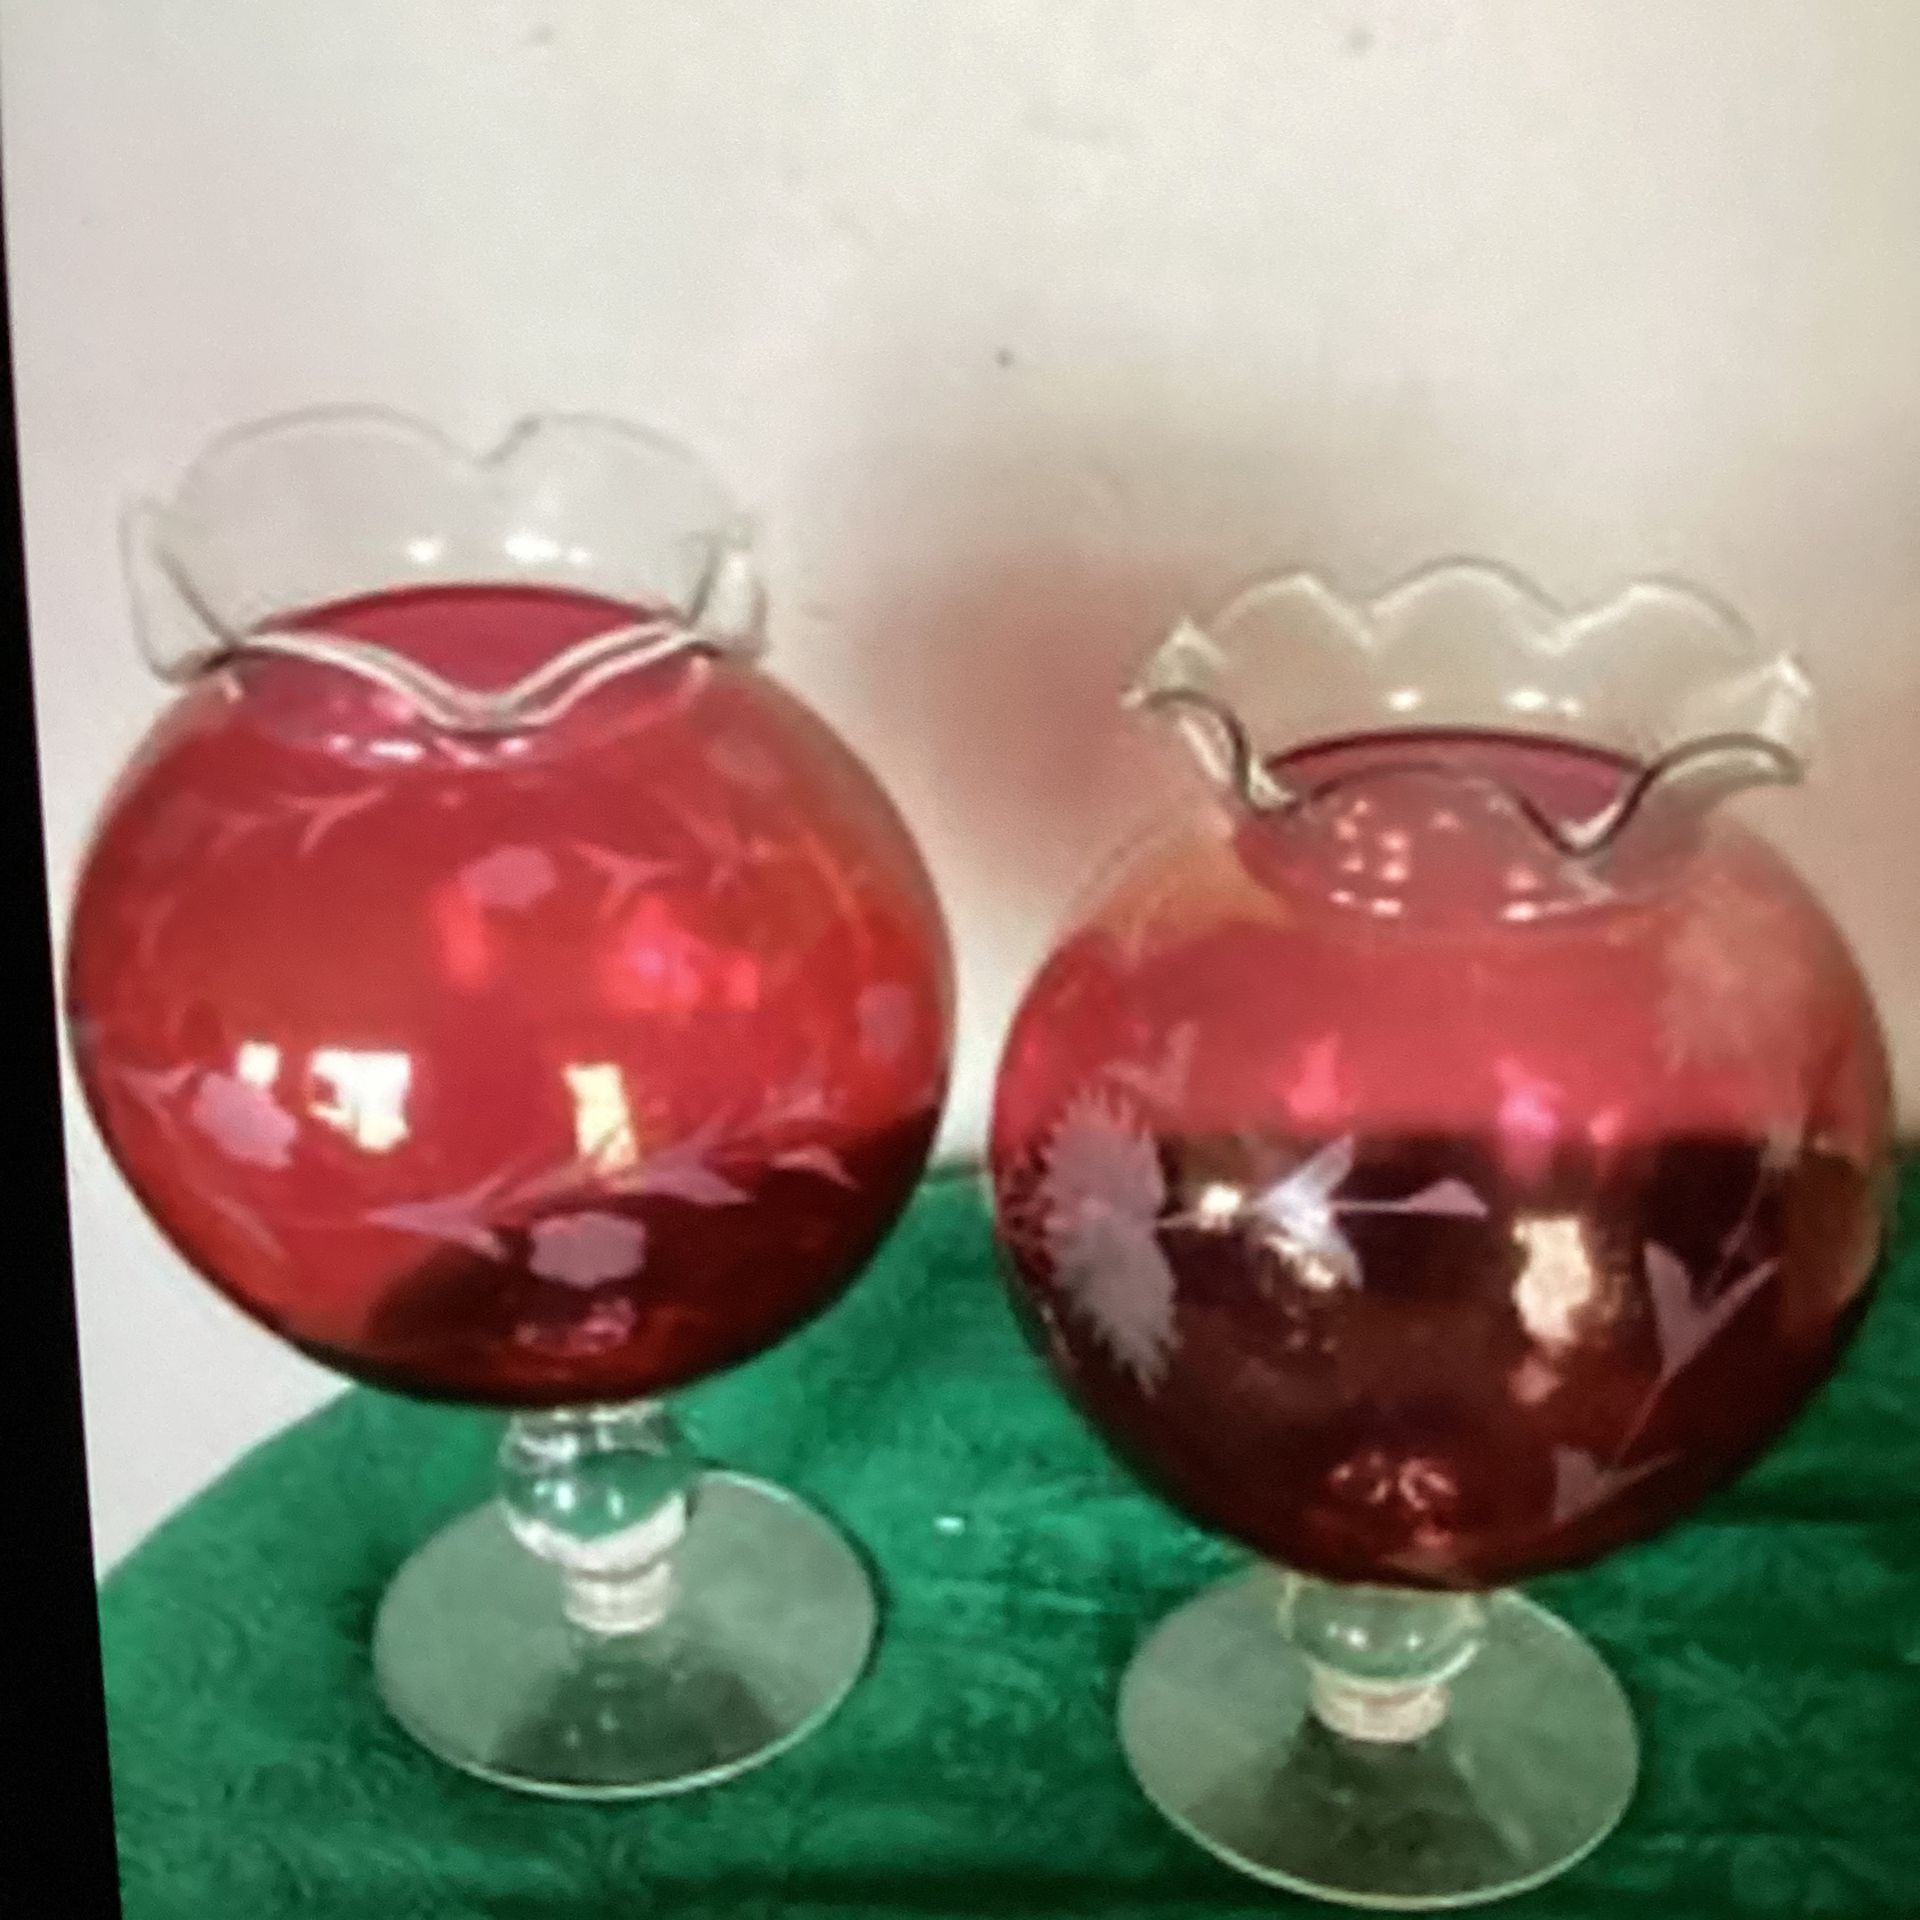 Fabulous Vintage Cranberry Glass Vases With Etched Flowers & Ruffled Edges